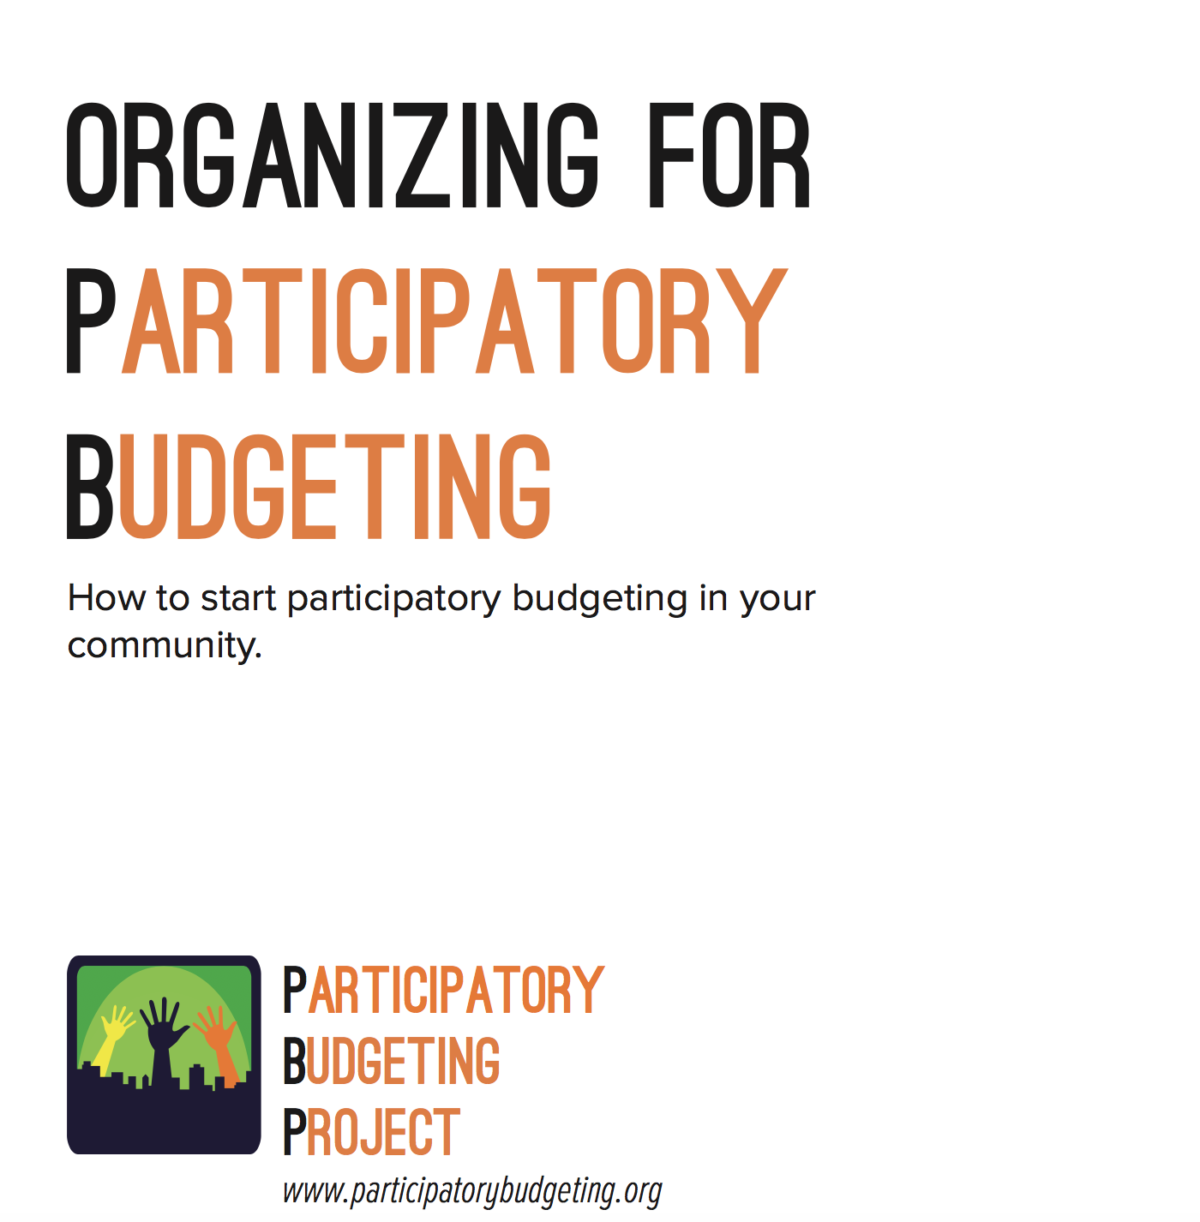 Cover image of Organizing for Participatory Budgeting, a guide developed by the Participatory Budgeting Project.